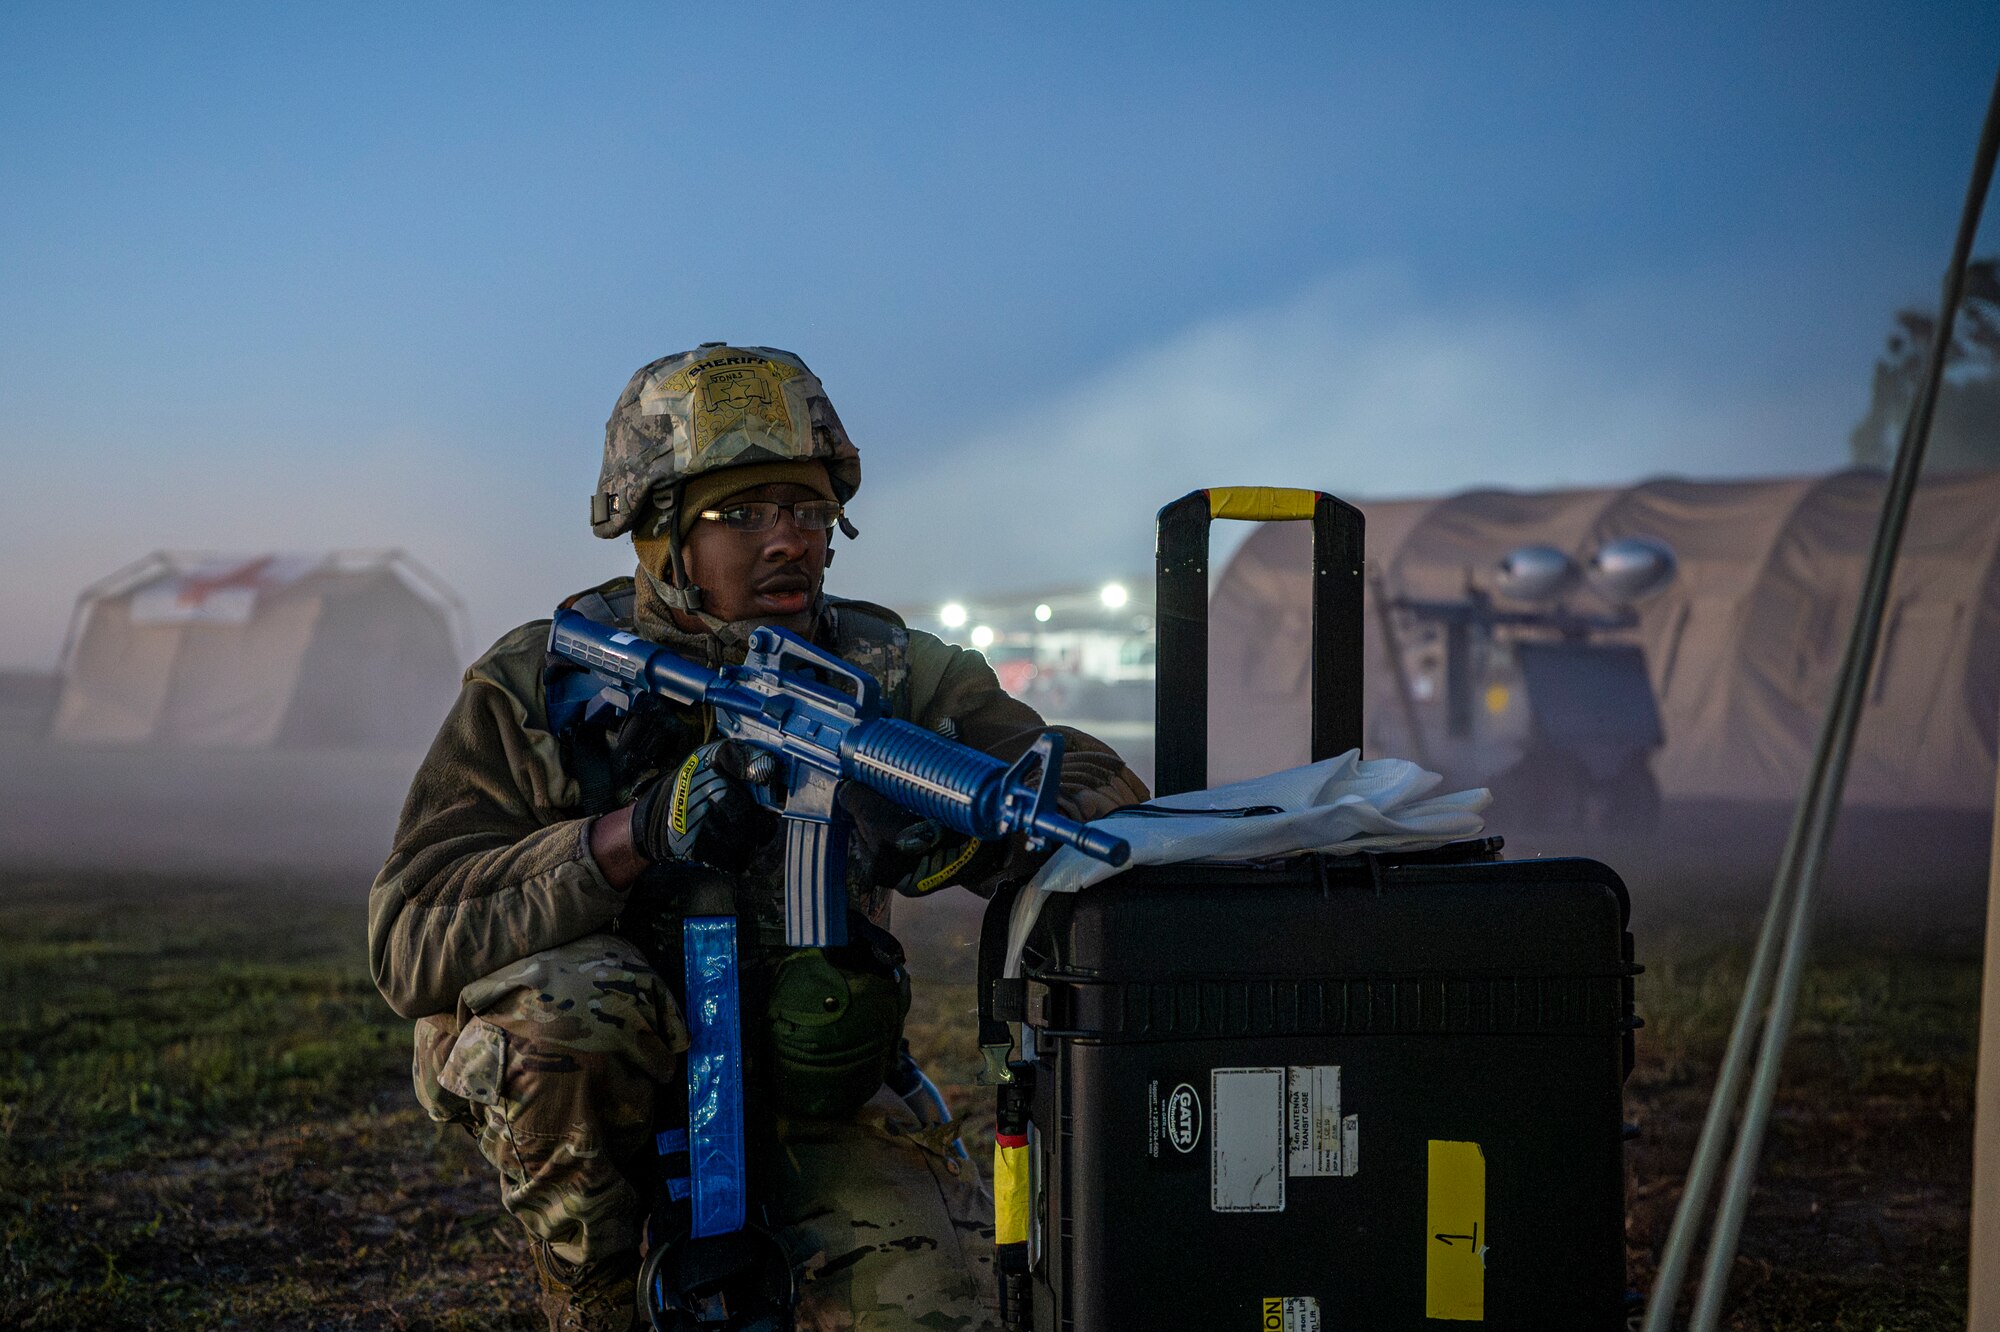 A U.S. Air Force Airman assigned to the 23rd Wing stands guard during Exercise Ready Tiger 24-1 at Avon Park Air Force Range, Florida, April 14, 2024. Exercise participants responded to a multi-prong ground attack in the early hours of the morning. Ready Tiger 24-1 is a readiness exercise demonstrating the 23rd Wing’s ability to plan, prepare and execute operations and maintenance to project air power in contested and dispersed locations, defending the United States’ interests and allies. (U.S. Air Force photo by Airman 1st Class Leonid Soubbotine)